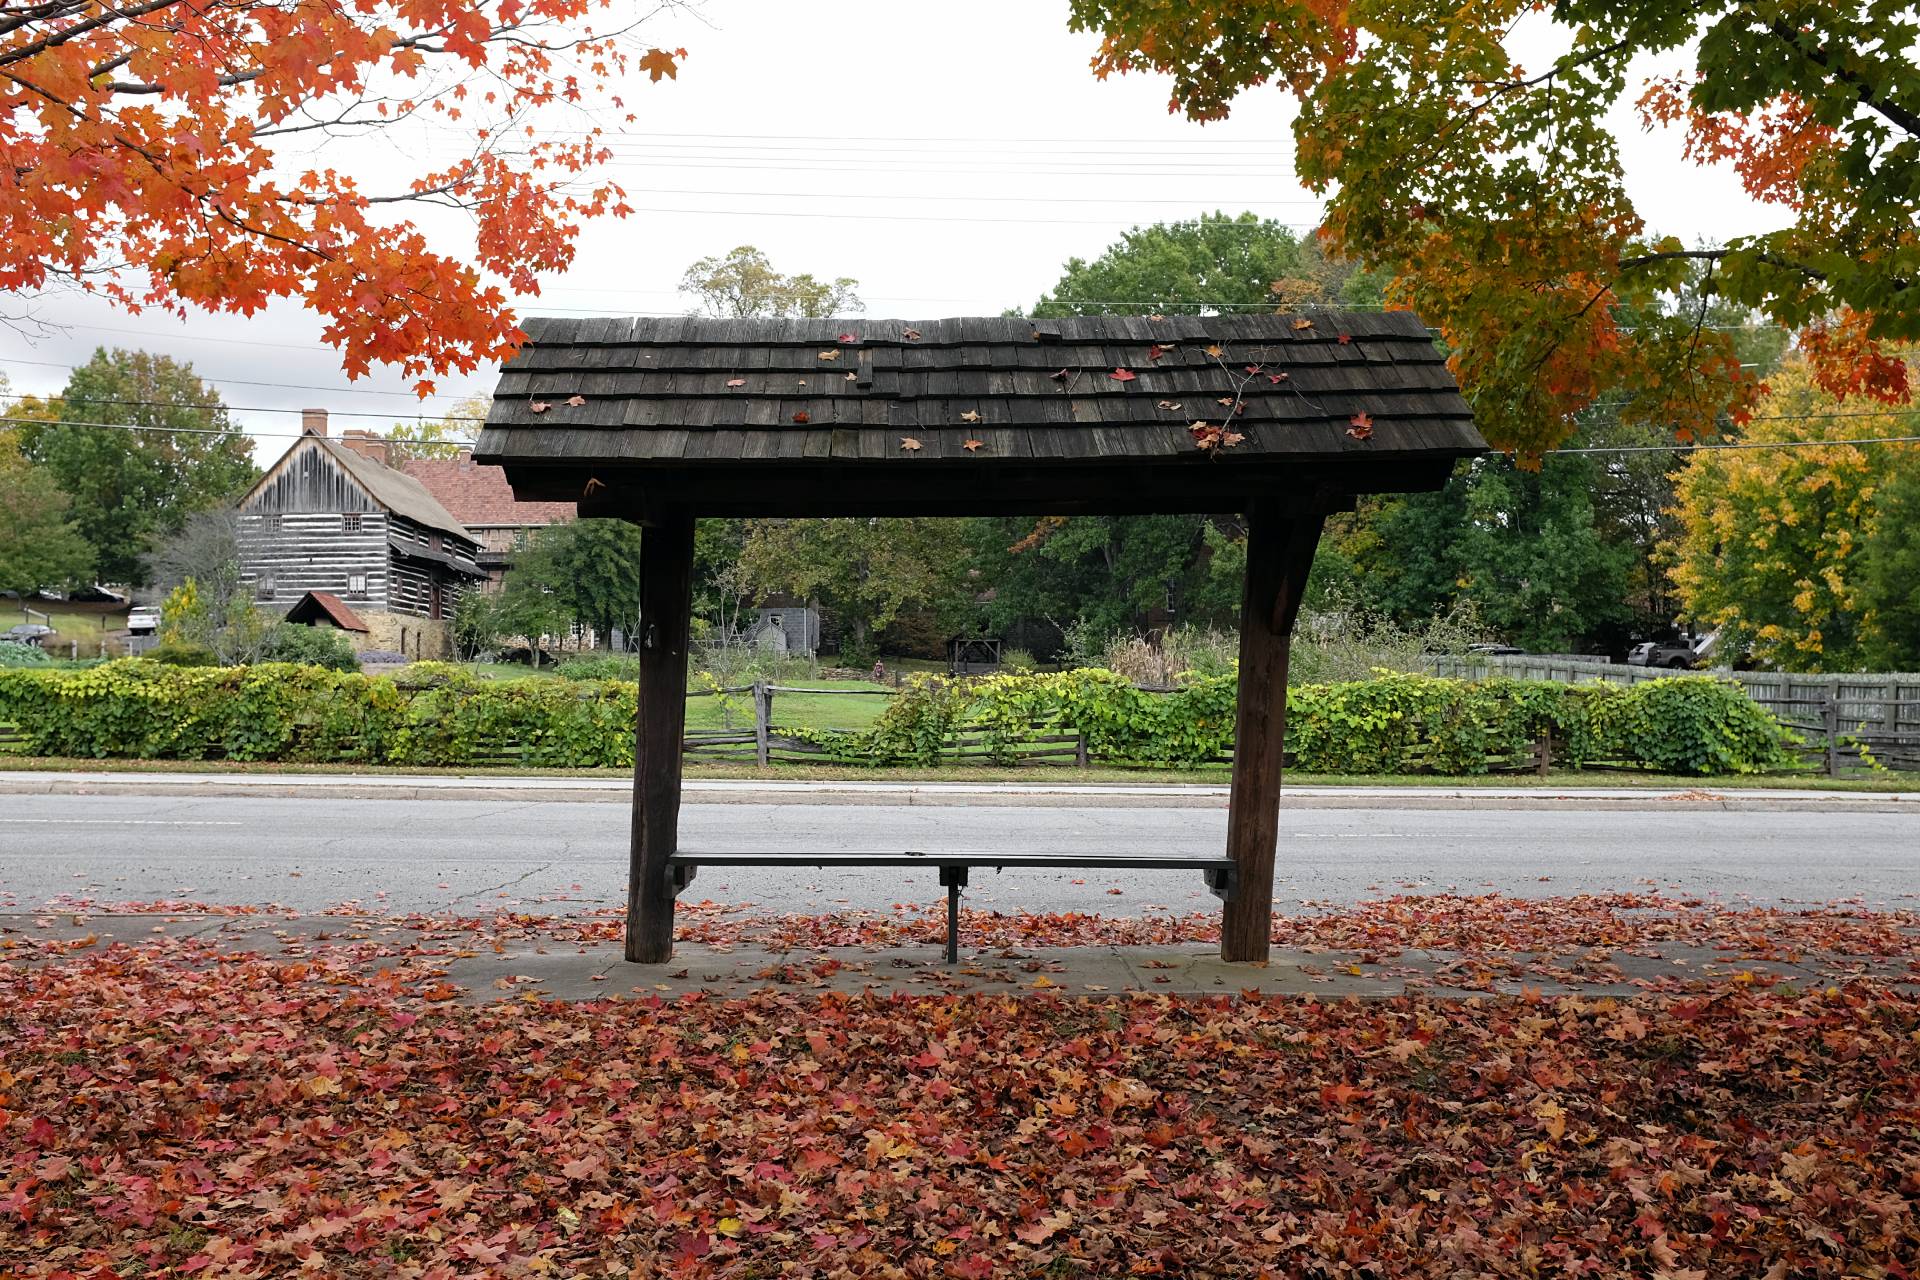 An old leaning covered bench and lots of colorful leaves on the ground underneath it